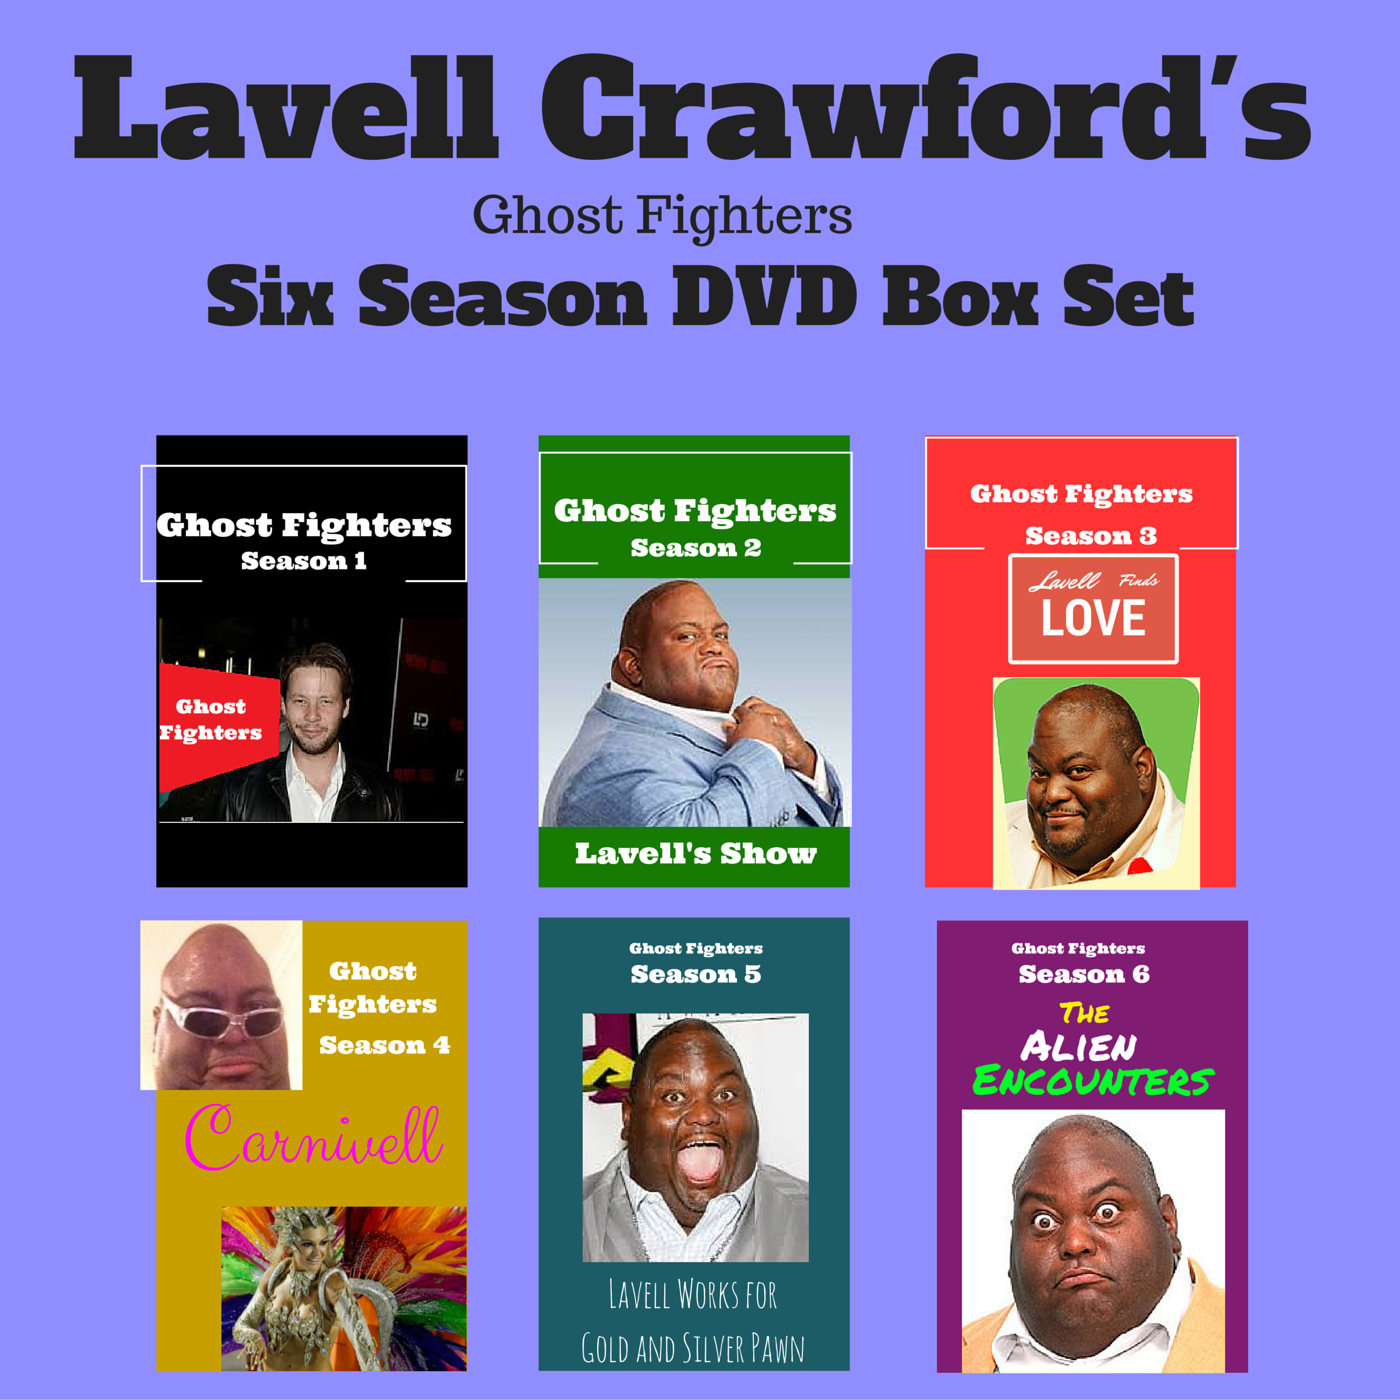 Episode 15 - Lavell Crawford's Ghost Fighters feat. Ben DiPette